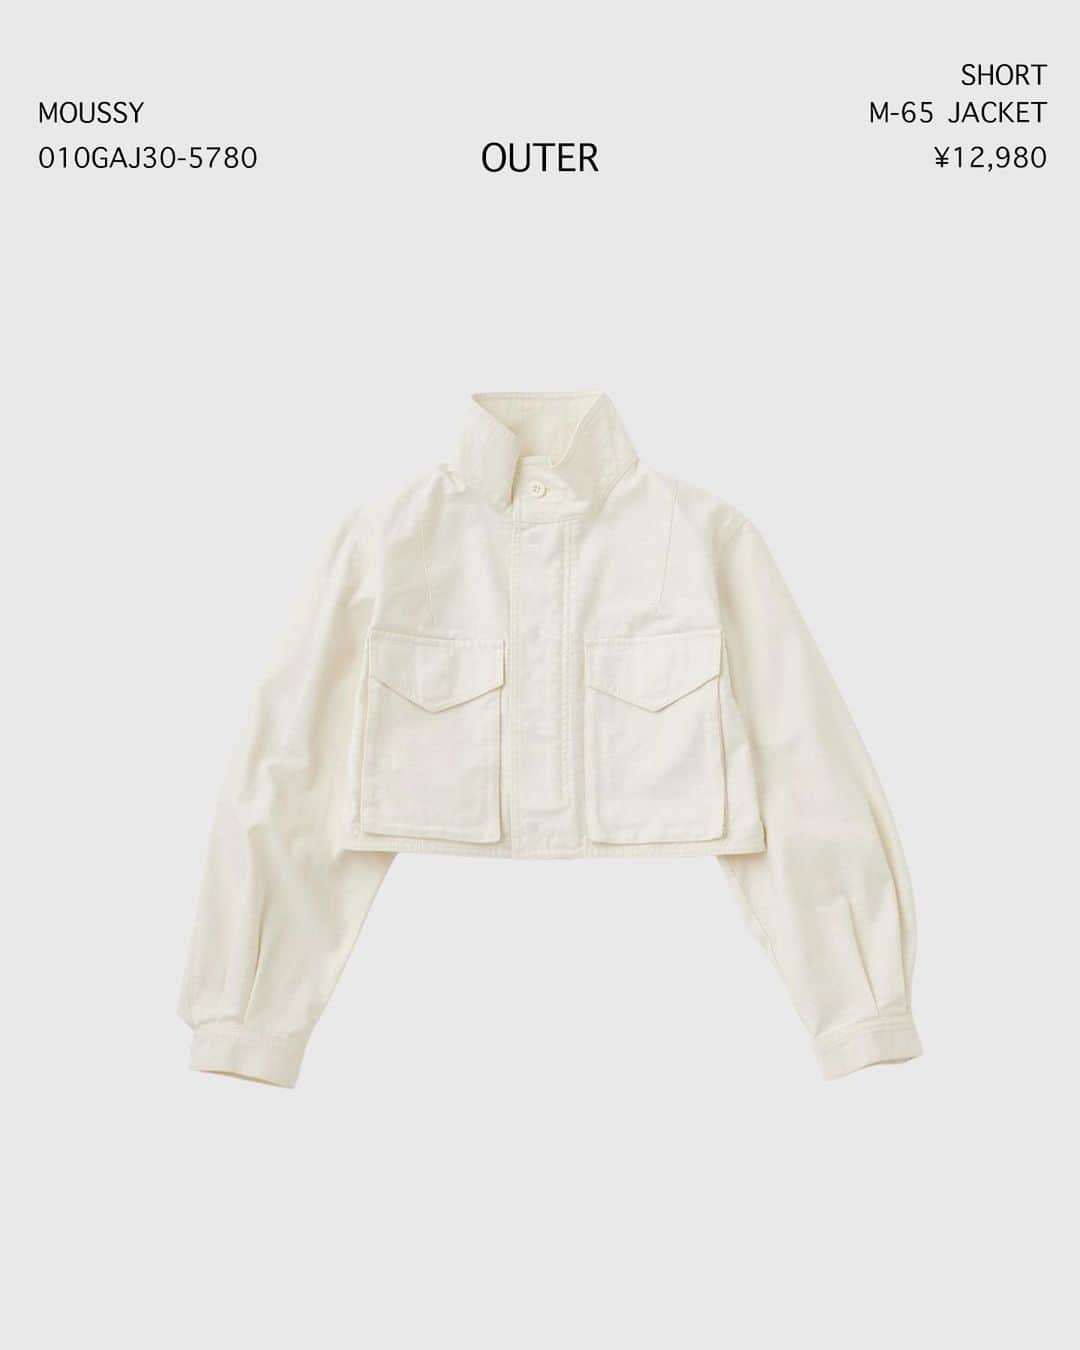 SHEL'TTER WEB STOREさんのインスタグラム写真 - (SHEL'TTER WEB STOREInstagram)「【NEW IN】 - OUTER -  ━━━━━━━━━━━━━━━━  【MOUSSY】MODS コート ¥21,890 tax in Size：1,2 Color：柄KHA,BEG No：010GAS30-5880 ※発売中  【SLY】VINTAGE F／LEATHER CROP ブルゾン ¥18,700 tax in Size：1,2 Color：BLK,BRN No：030GAY30-1030 ※発売中  【LAGUA GEM】BIG POCKET MA-1 R ¥18,700 tax in Size：FREE Color：KHA,BLK,C.GRY No：510GAZ30-0610 ※発売中  【M_】KAPOK BOMBER ジャケット ¥18,480 tax in Size：1,2 Color：D/BRN,BLK,WHT,BLU No：010GA230-5550 ※発売中  【MOUSSY】SHORT M-65 ジャケット ¥12,980 tax in Size：FREE Color：O/WHT,KHA,BLK No：010GAJ30-5780 ※発売中  気になるアイテムは画像をタップまたは  プロフィールのサイトURLをクリック✔  ━━━━━━━━━━━━━━━━  #SHELTTERWEBSTORE #SWS #MOUSSY #M_ #M_MOUSSY #LAGUAGEM #SLY #newin #2023AW #autumn2023 #lightouter #modscoat #ma1 #cropped #blouson #m65 #leather  #新作 #アウター #レザー #レザーブルゾン #ジャケット #コート #モッズコート #クロップド丈 #ミリタリージャケット #オーバーサイズ」10月3日 13時27分 - sheltterwebstore